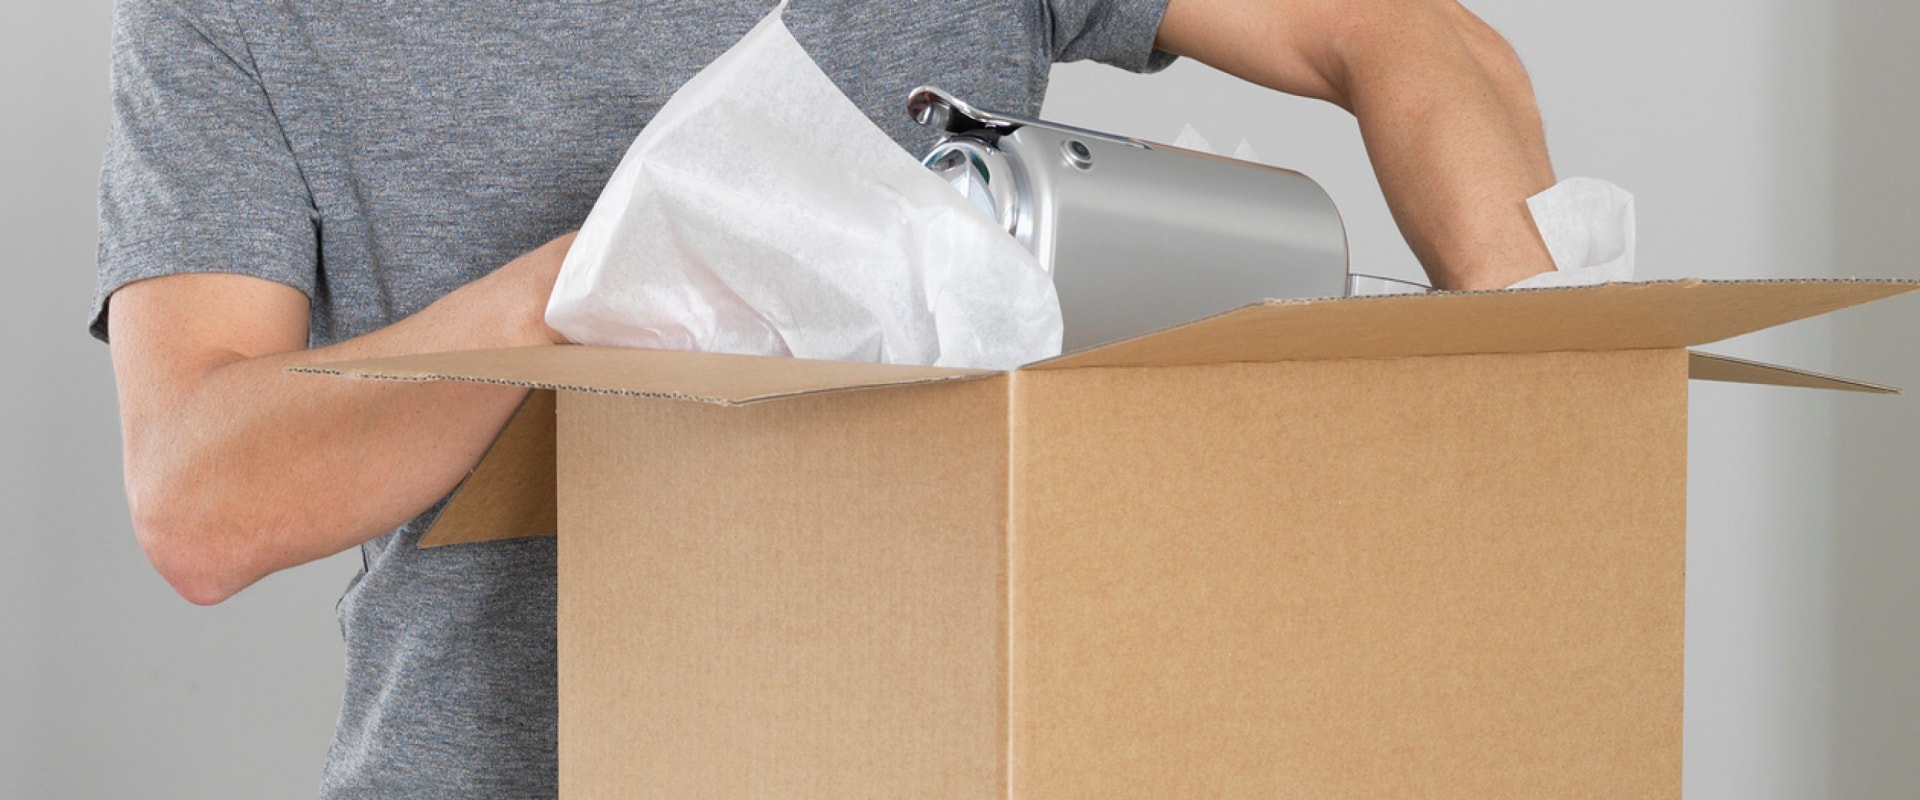 How to Ensure Safe and Efficient Handling and Packaging of Goods